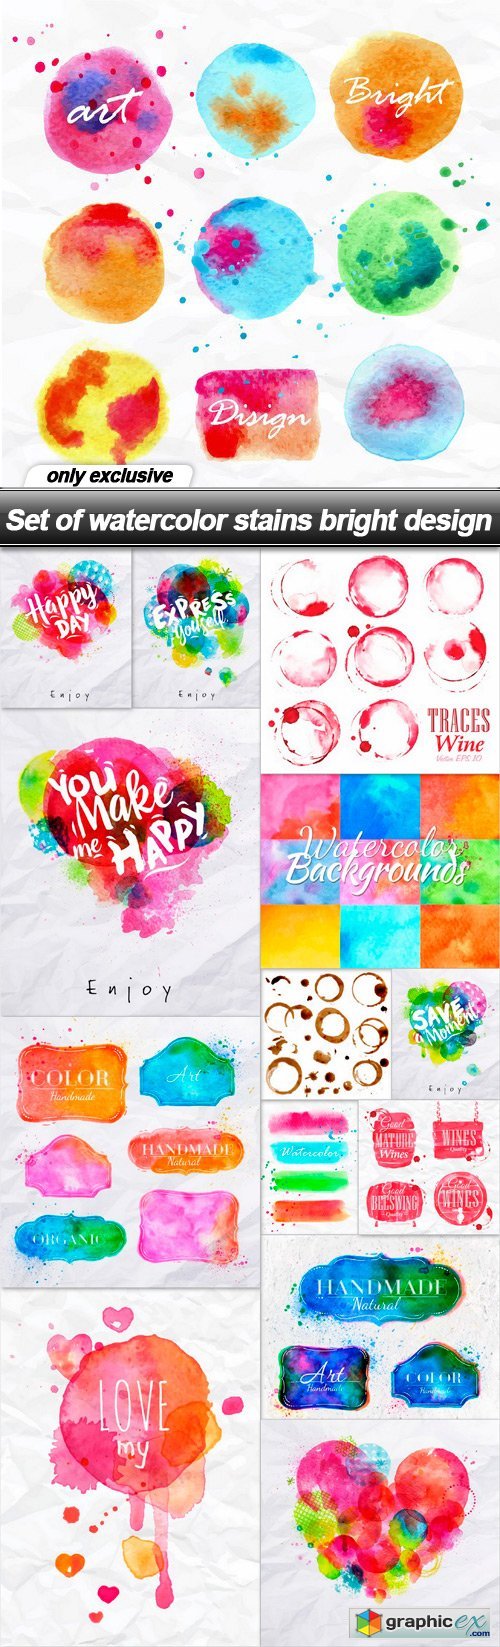 Set of watercolor stains bright design - 14 EPS